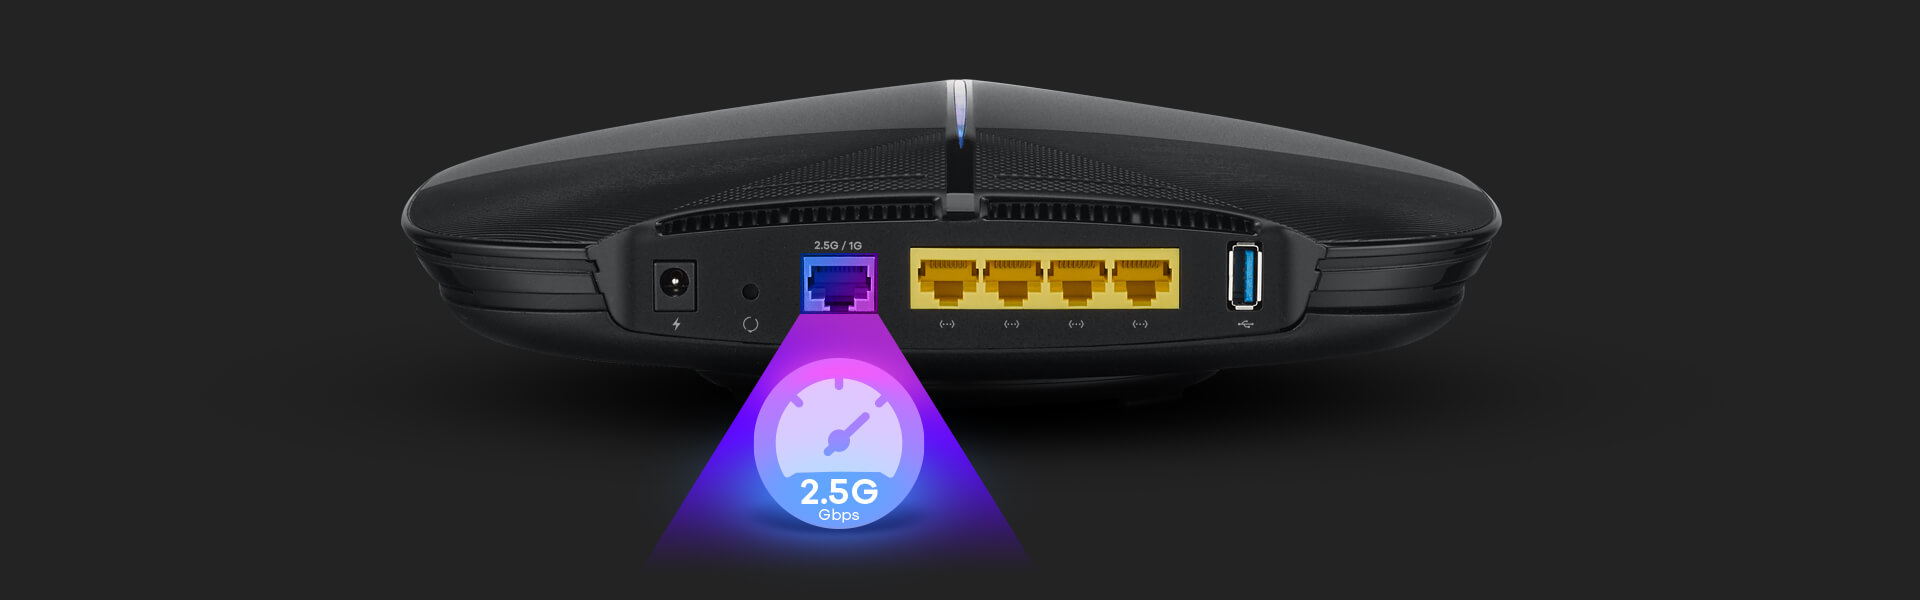 ARMOR G1, Supports up to 2.5Gbps multi-gigabit Internet services